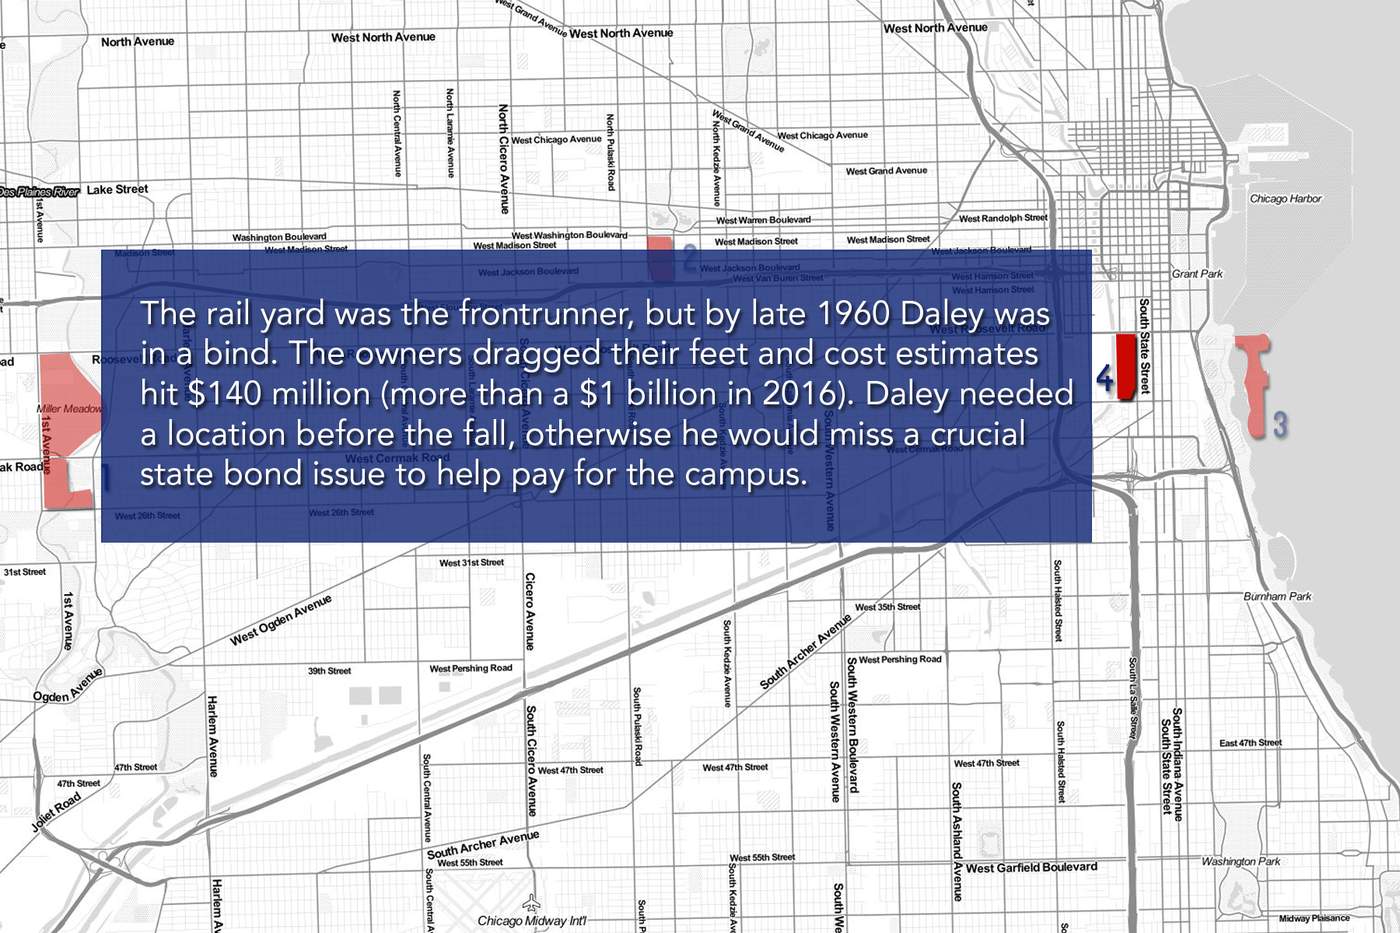 The rail yard was the frontrunner, but by late 1960 Daley was in a bind. The owners dragged their feet and cost estimates hit $140 million (more than a $1 billion in 2016). Daley needed a location before the fall, otherwise he’d miss a crucial state bond issue to help pay for the campus.